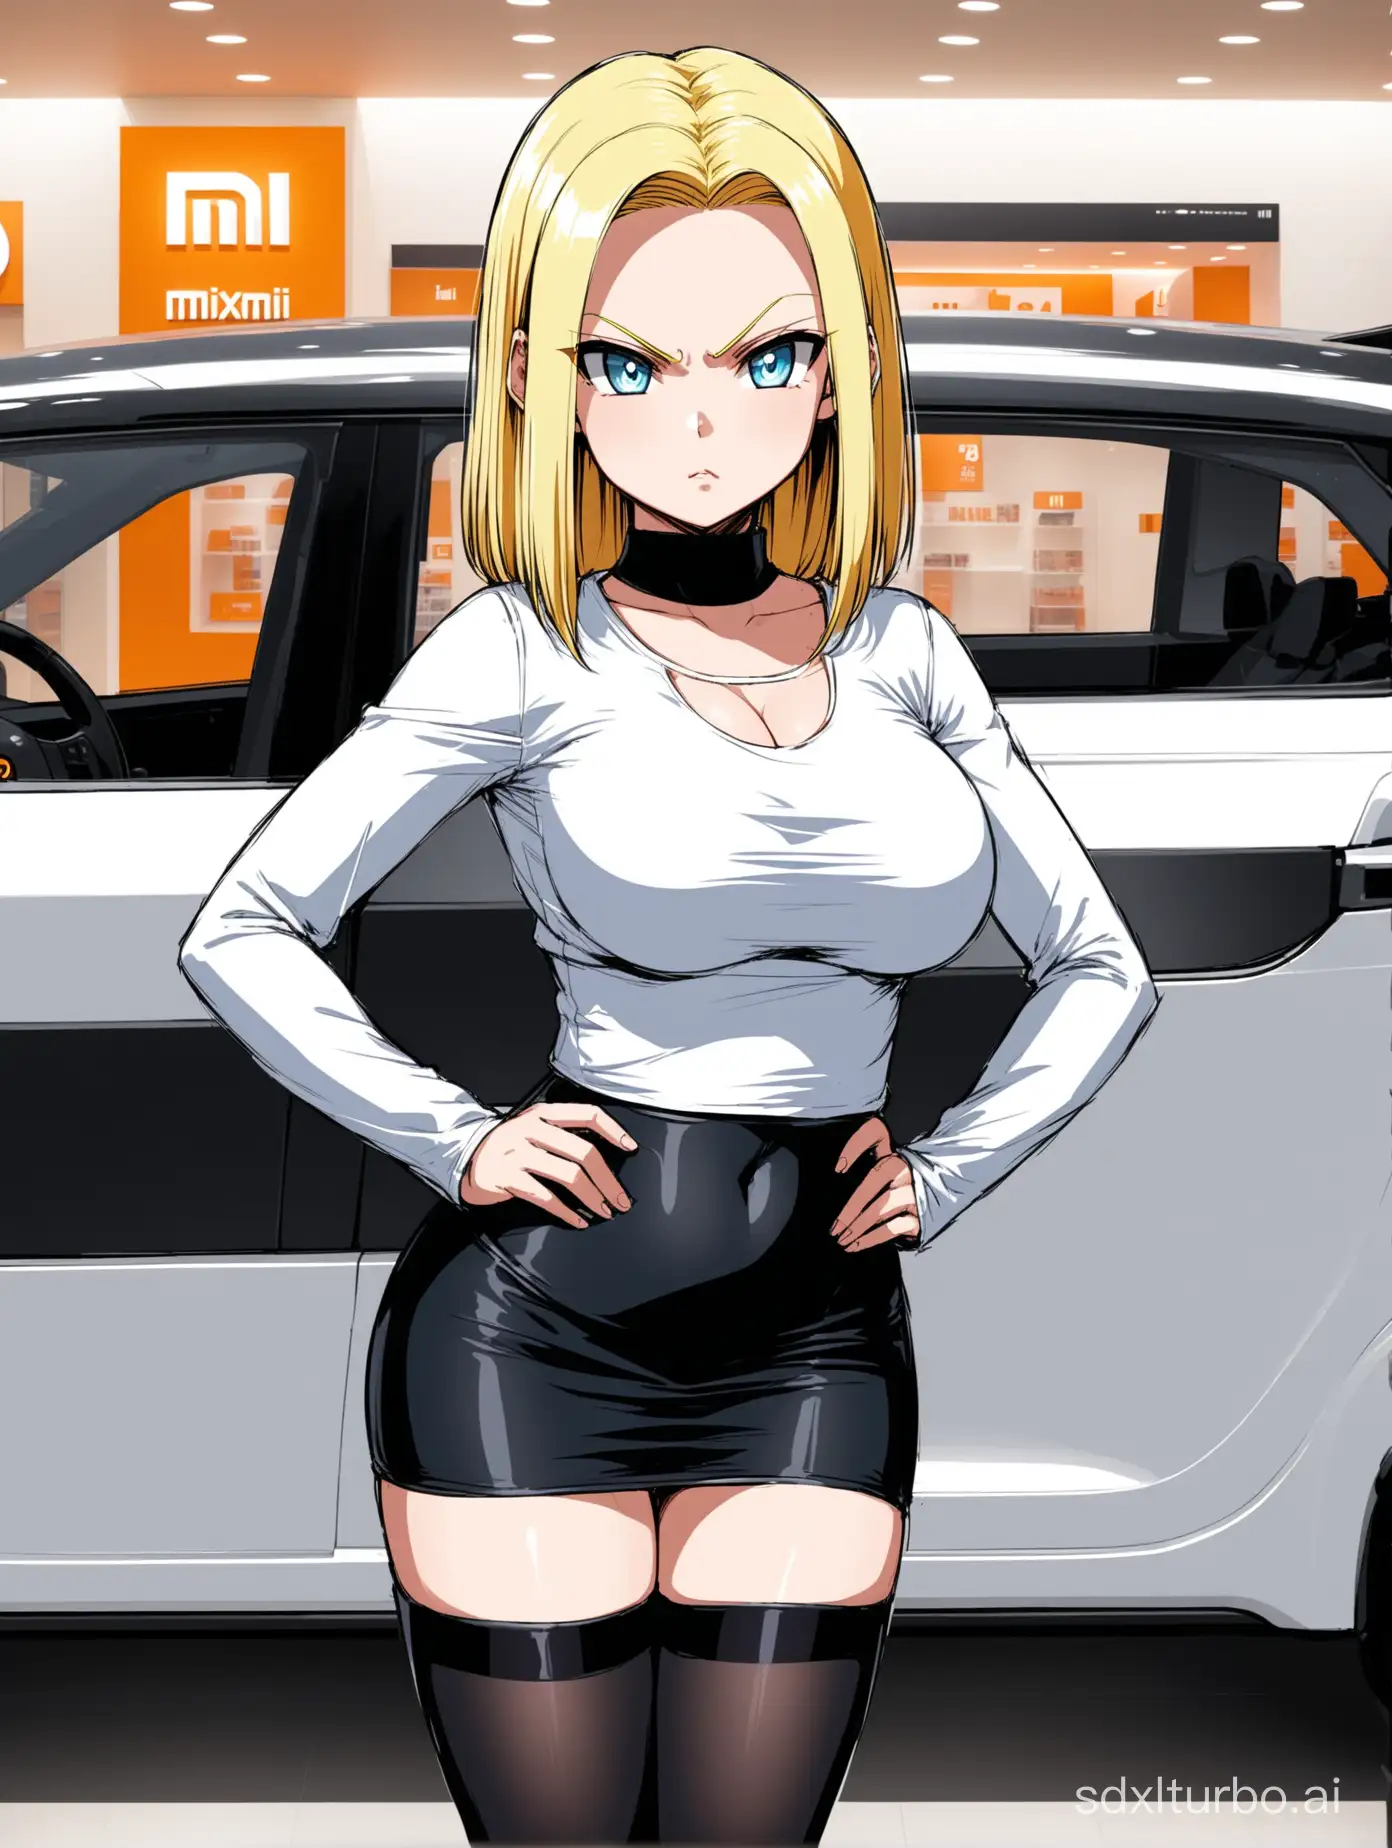 Seductive-Android-18-Visits-Xiaomi-4S-Store-Eyeing-Xiaomi-SU7-Car